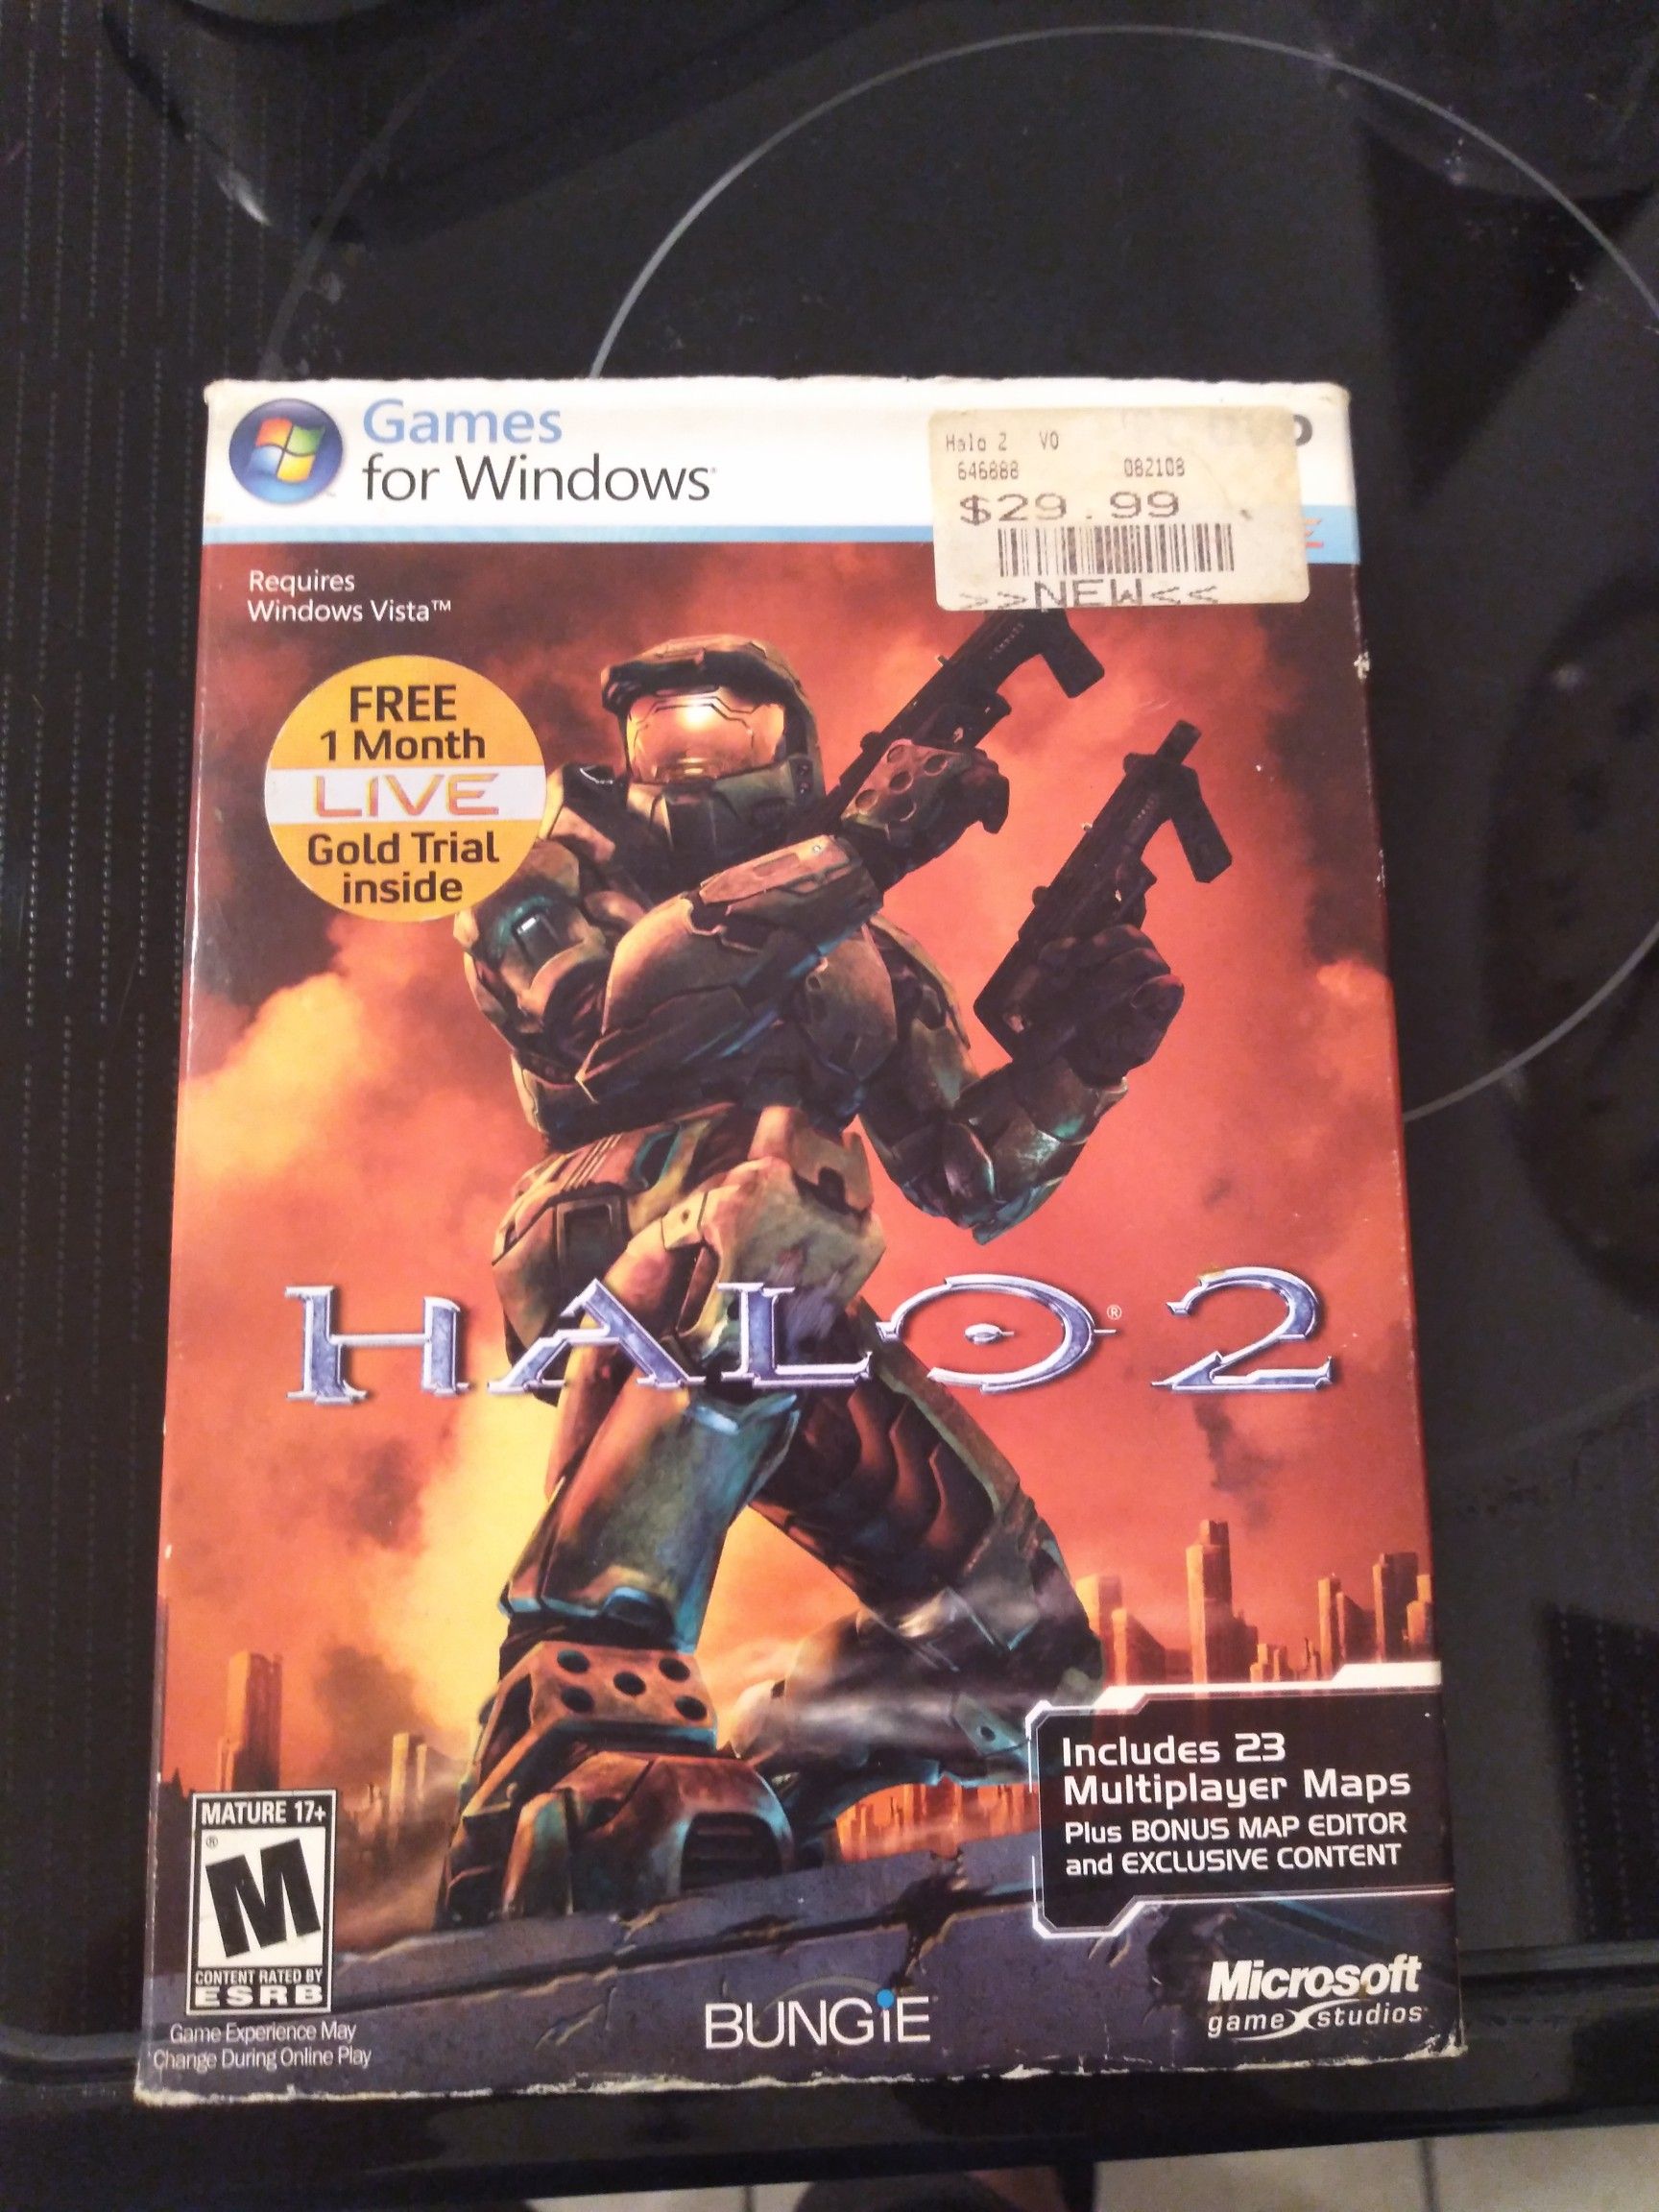 Halo 2 for Windows PC (extremely rare)